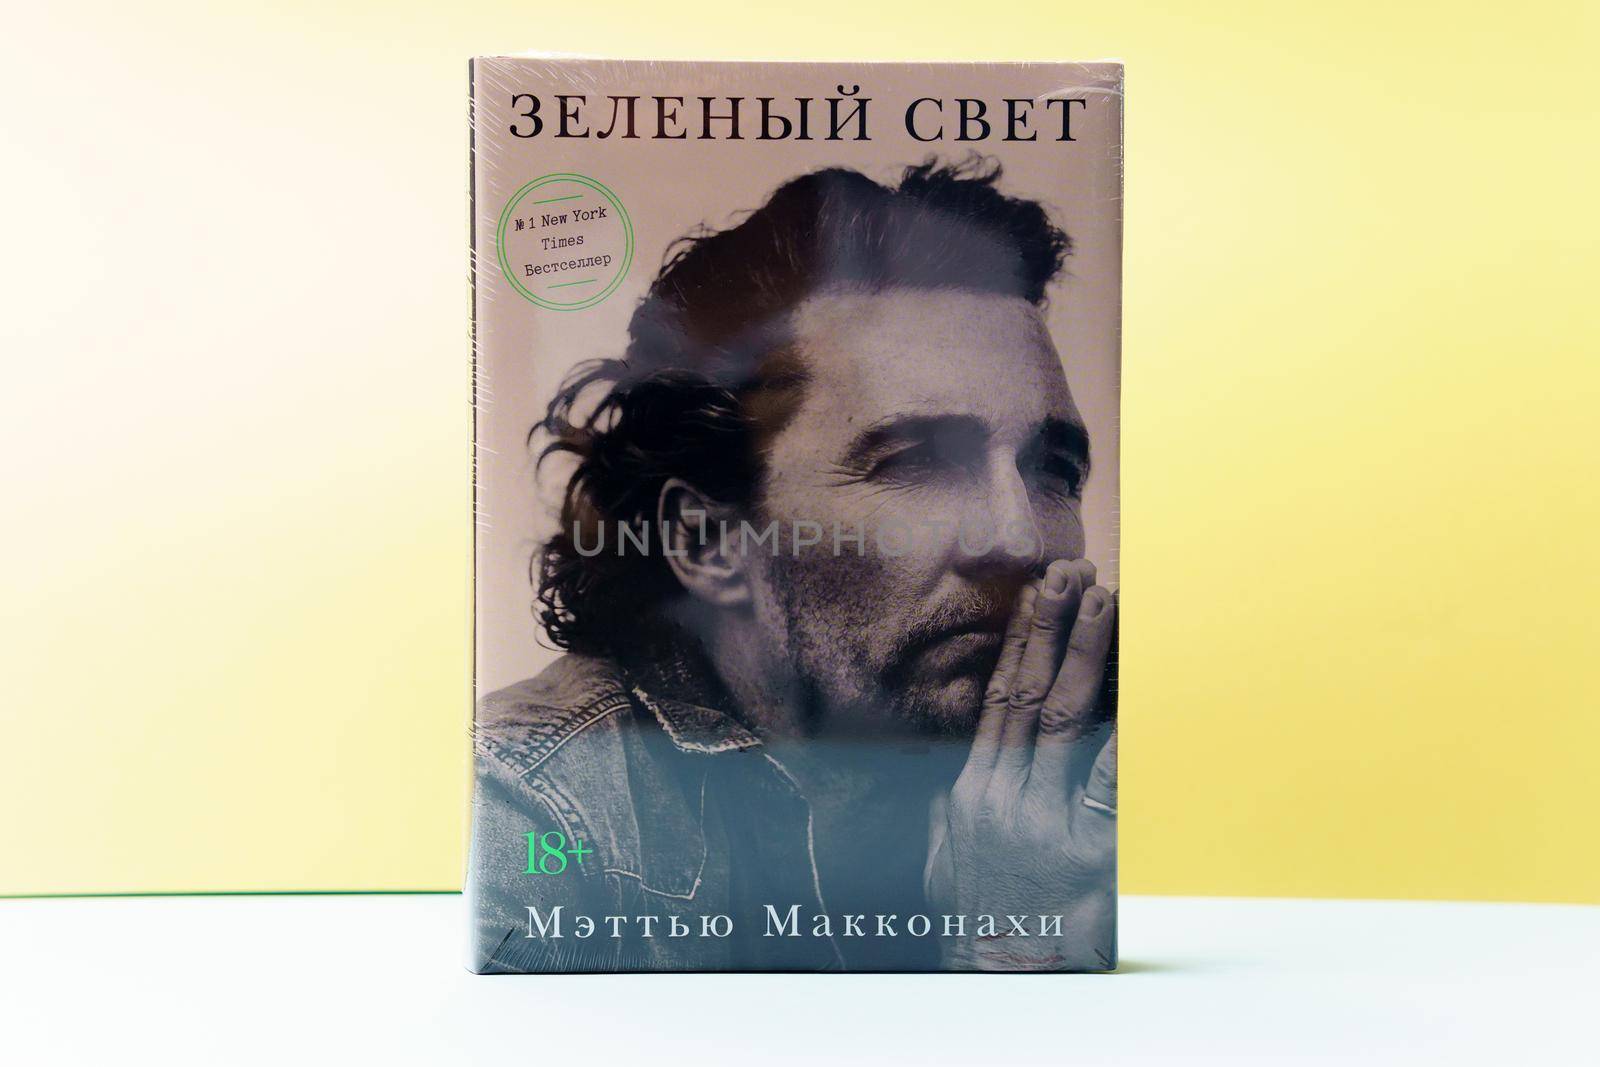 Tyumen, Russia-August 24, 2021: Matthew McConaughey Book Green Light. Number one New York Times best seller Over one million copies sold by darksoul72